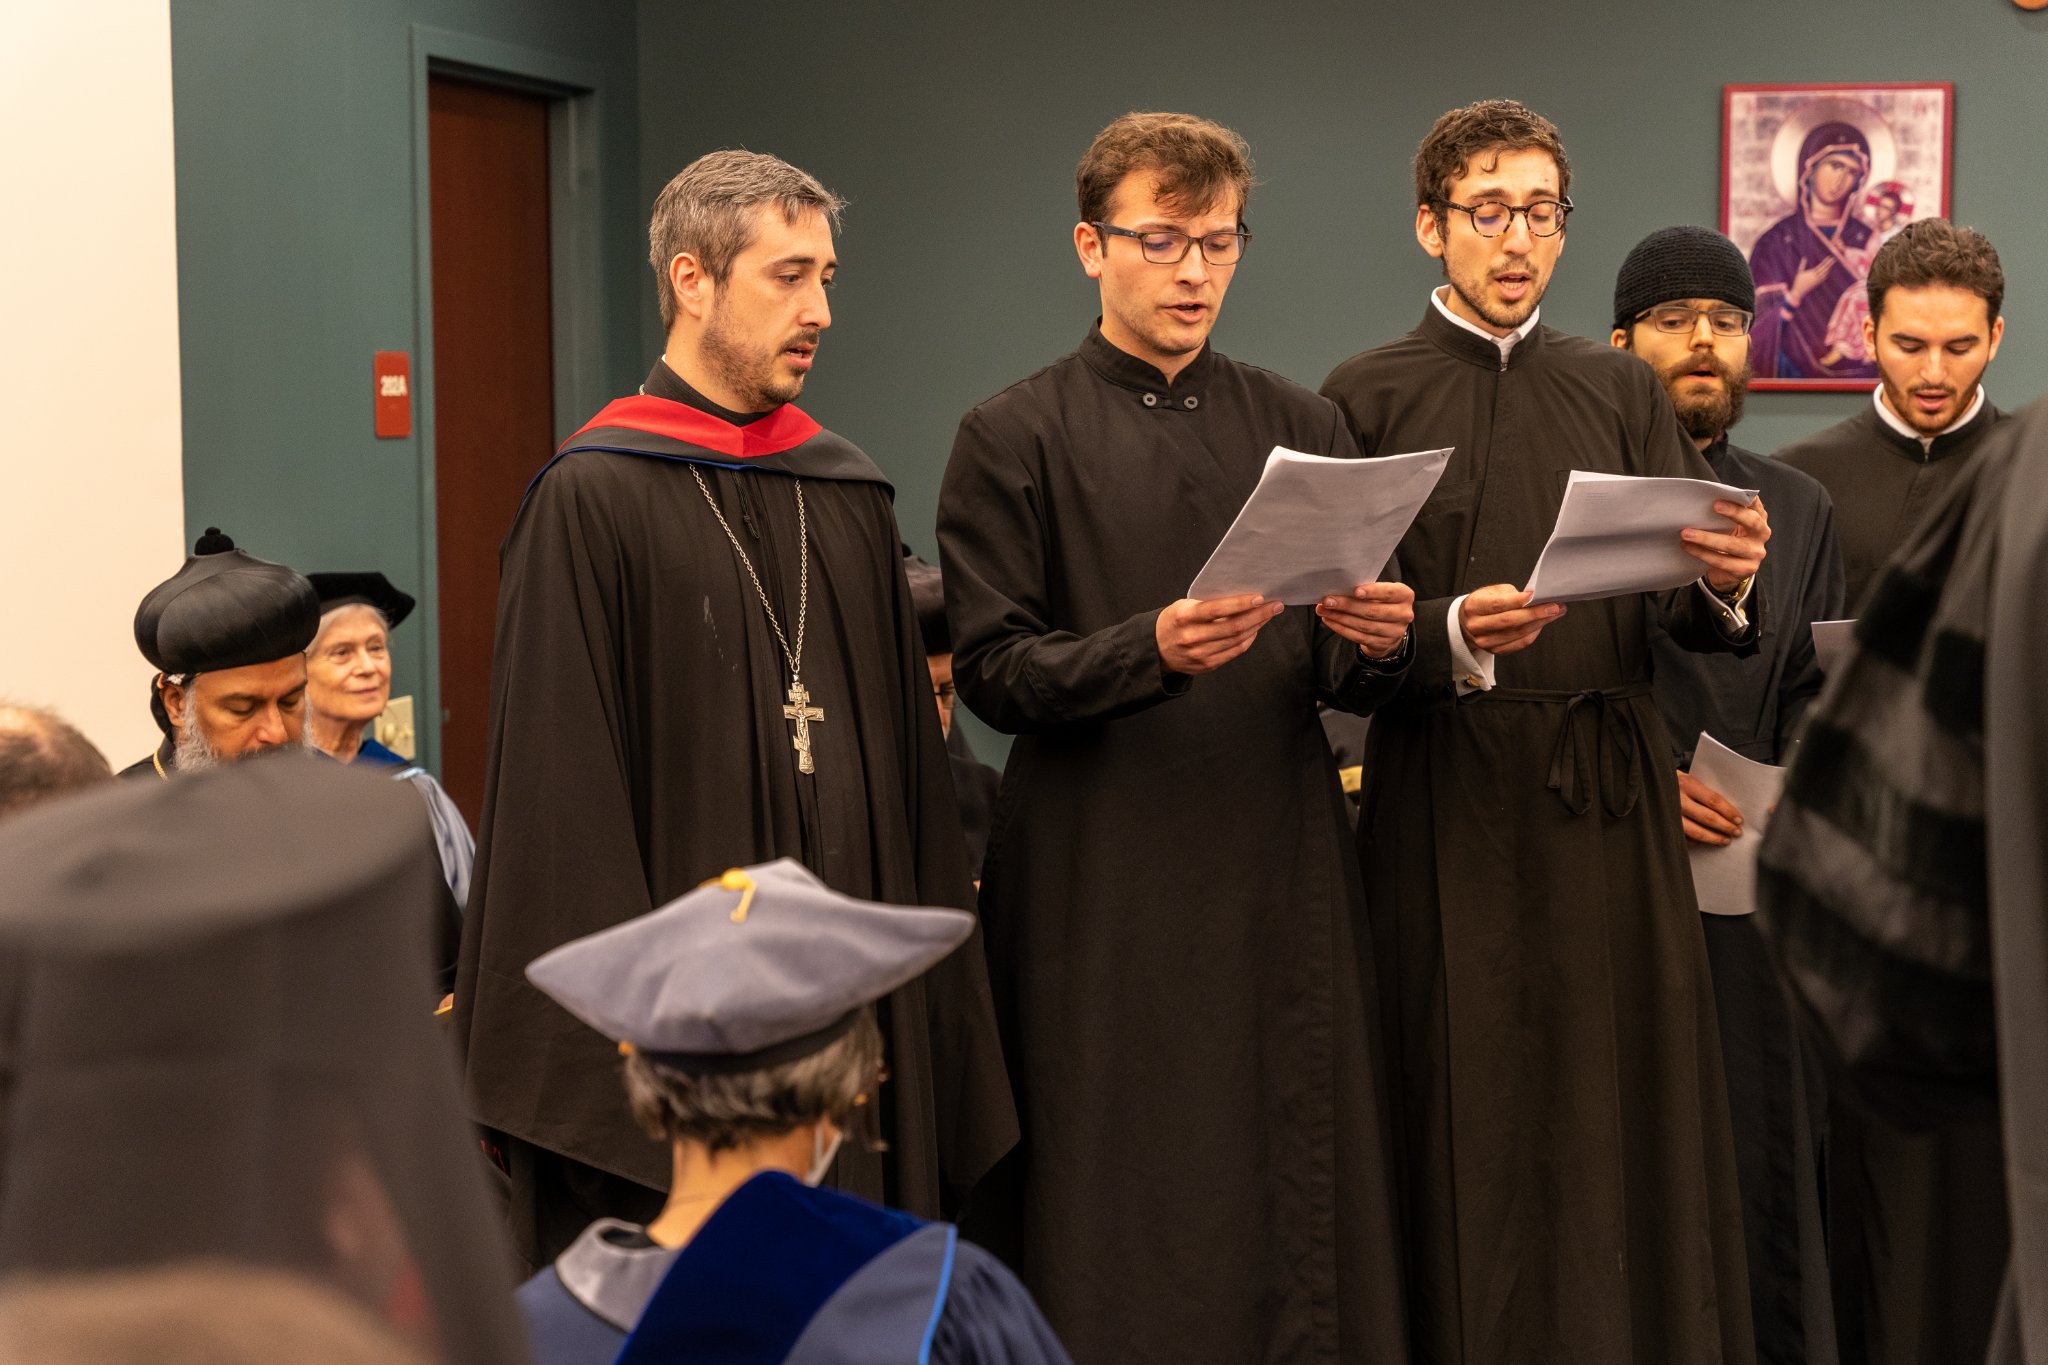 Choral performance during commencement